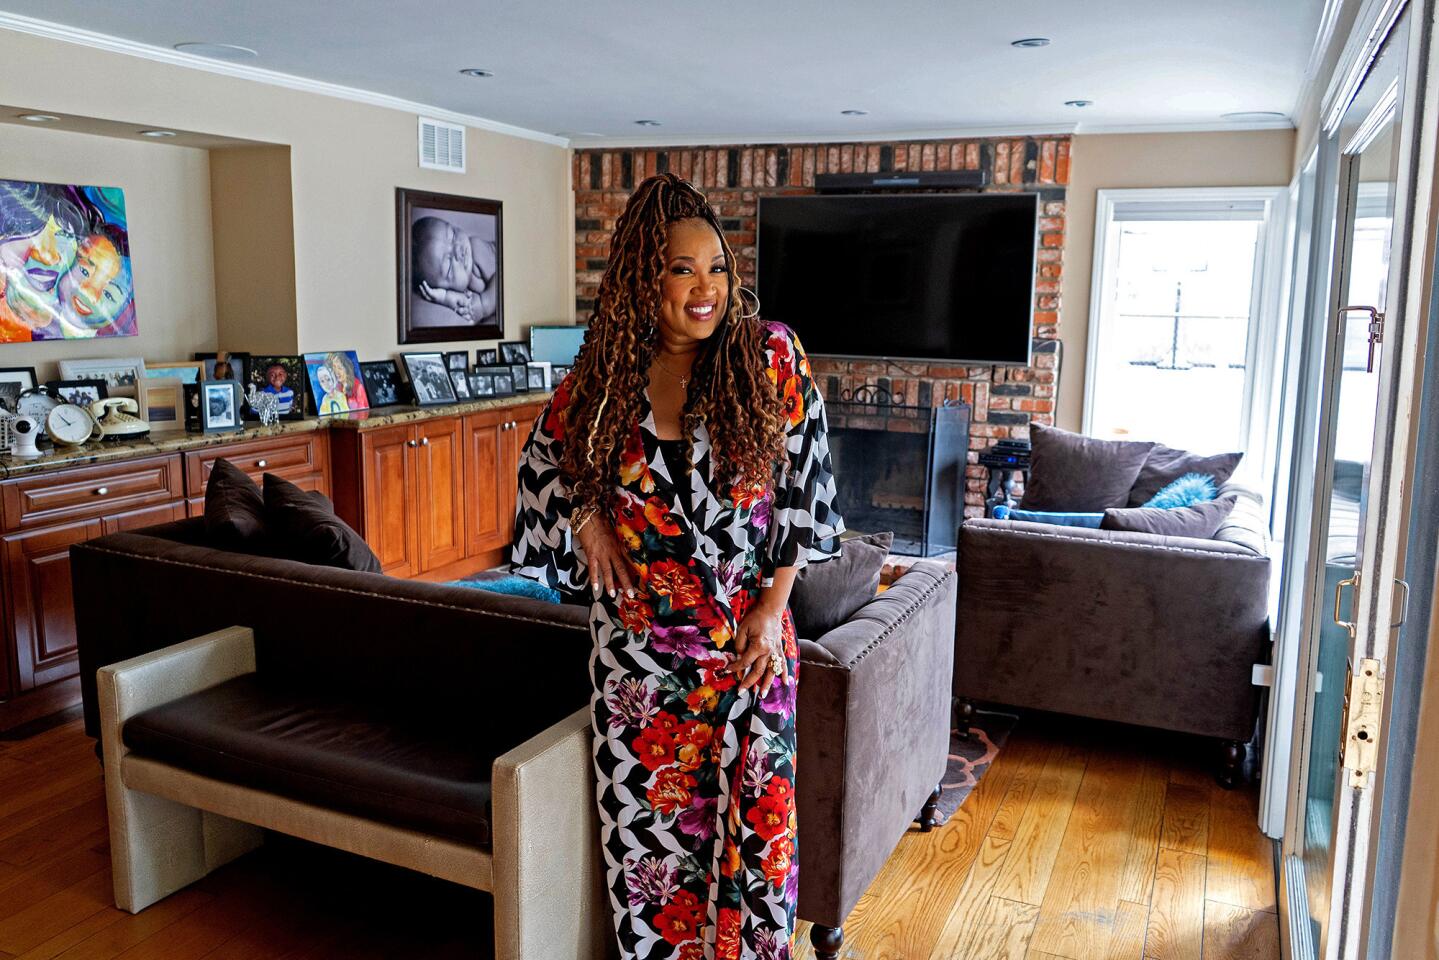 Actress and comedienne Kym Whitley calls the den/living room of her Tarzana home the epicenter of her life.